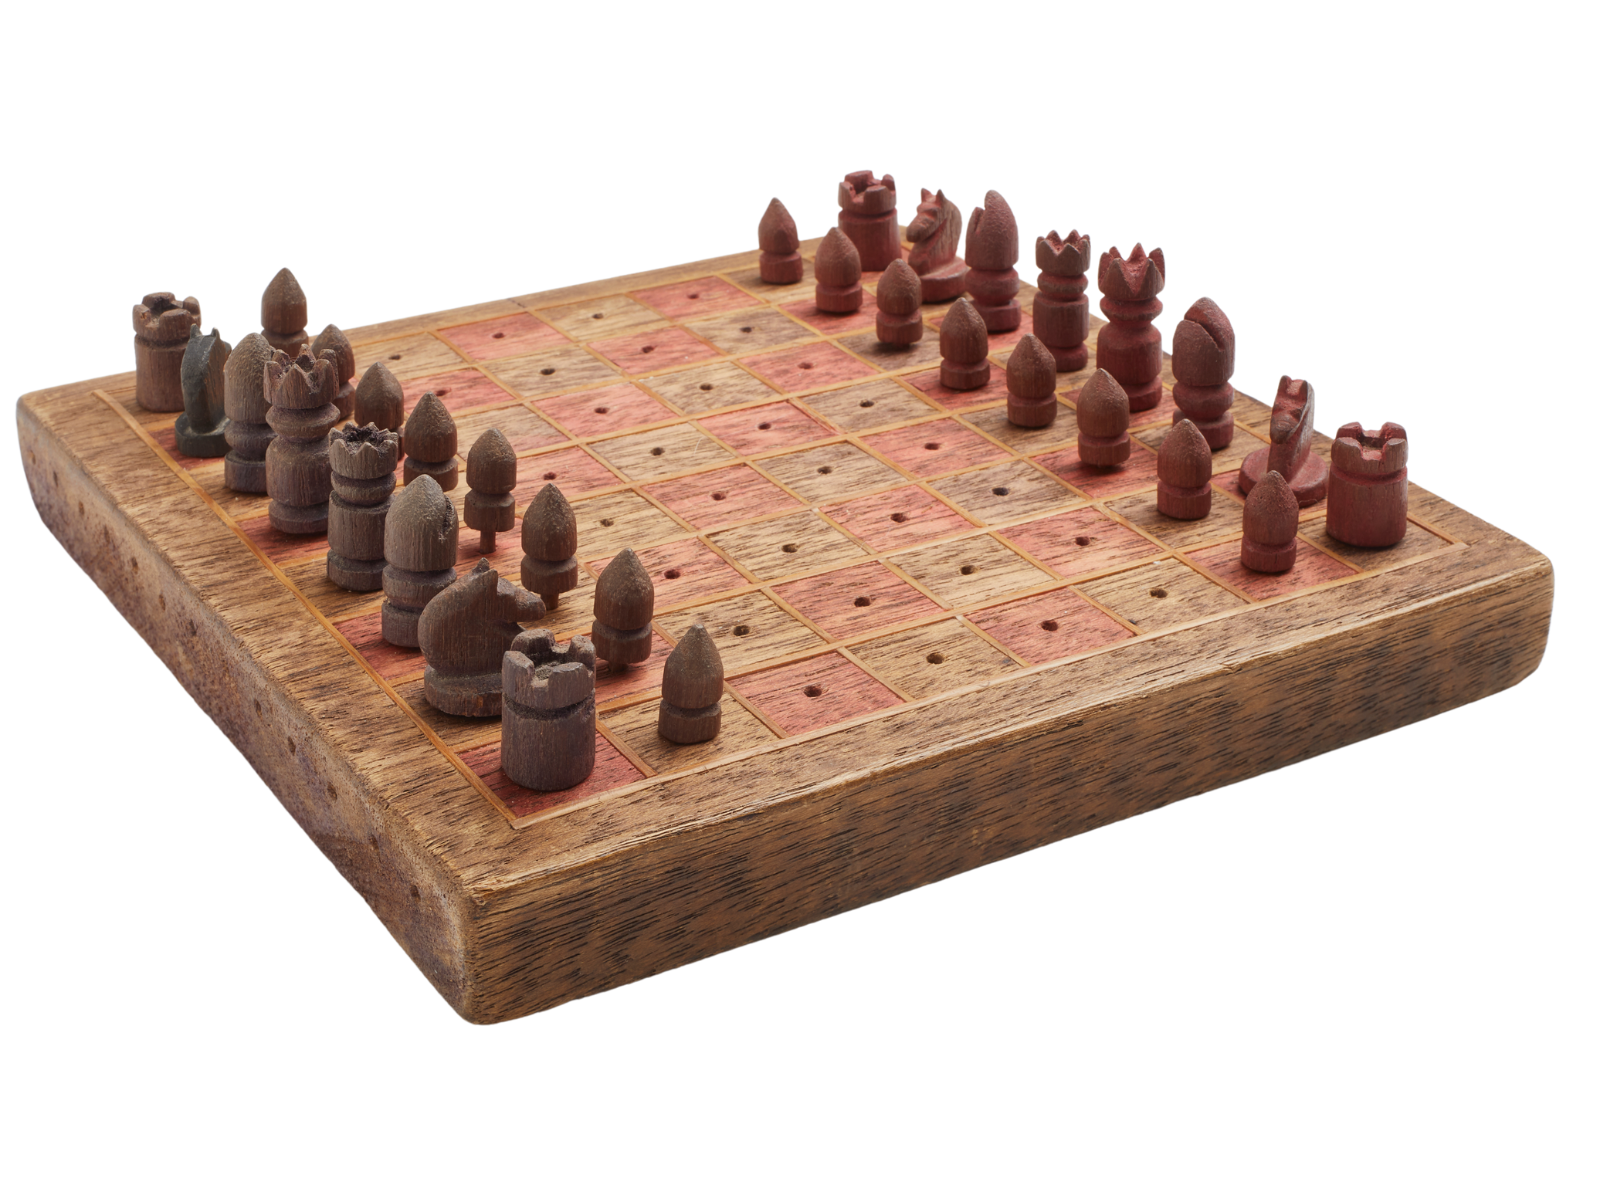 A wooden chess board set up with all the pieces in starting positions.